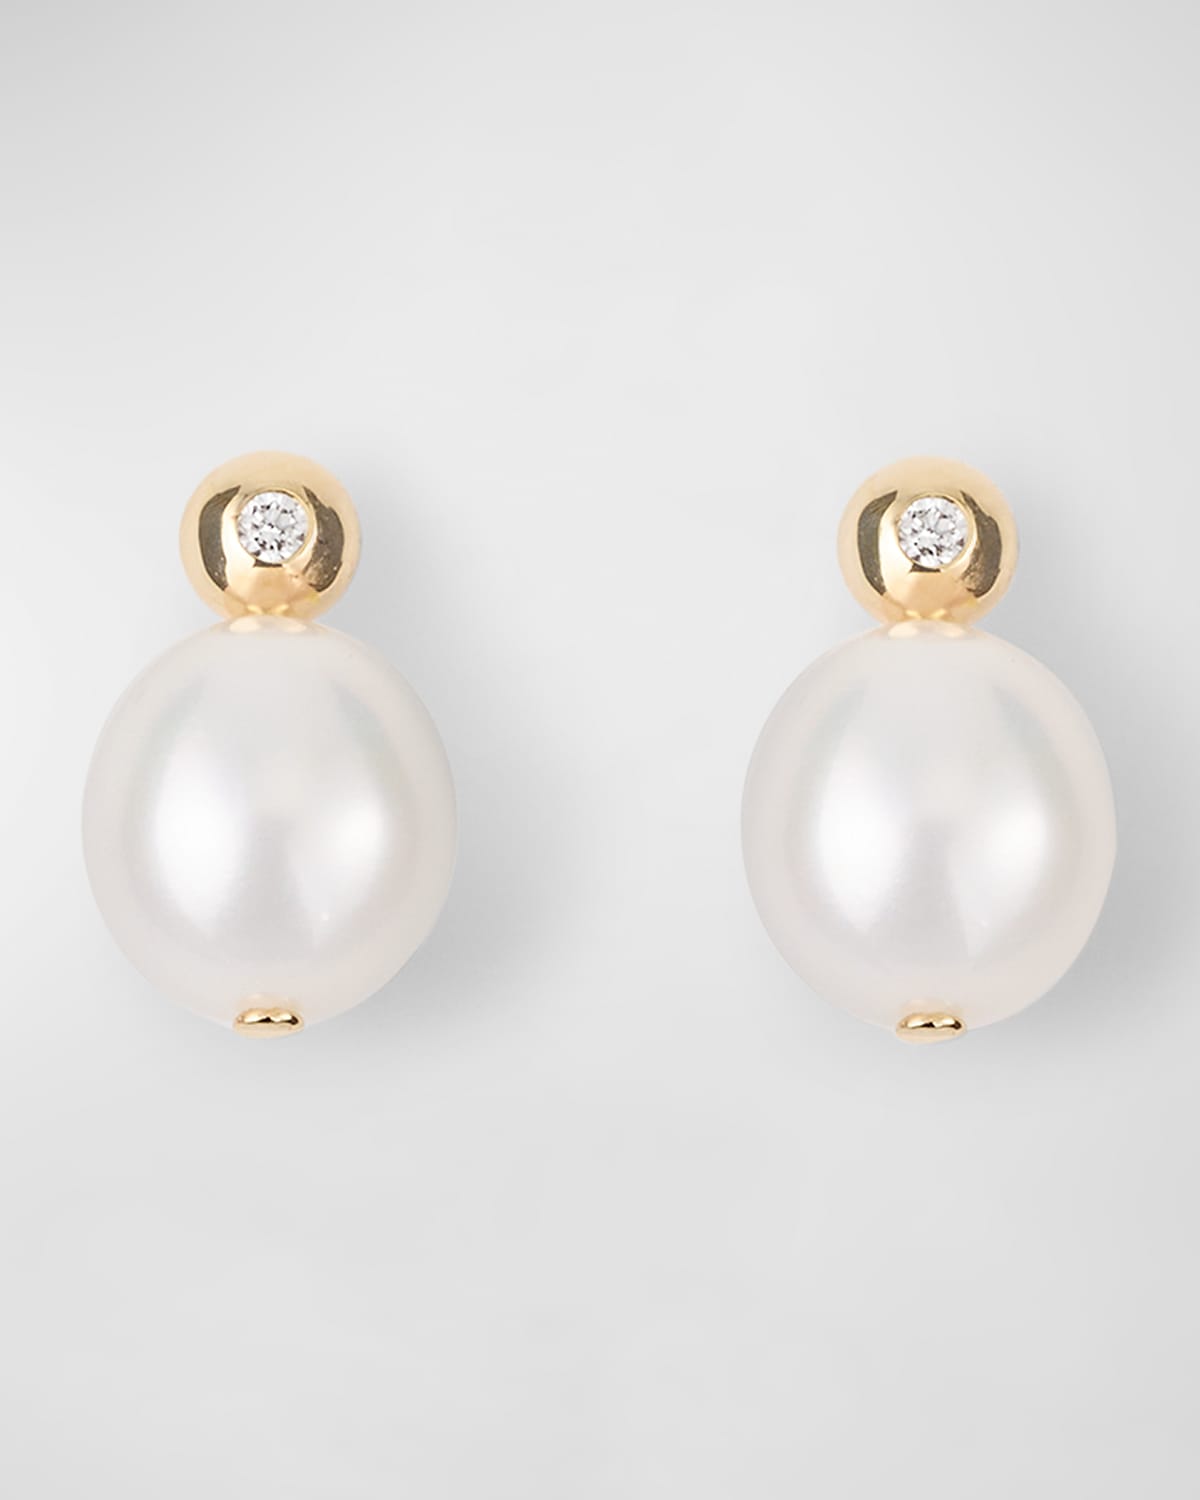 Gold Dome Diamond and Pearl Stud Earrings